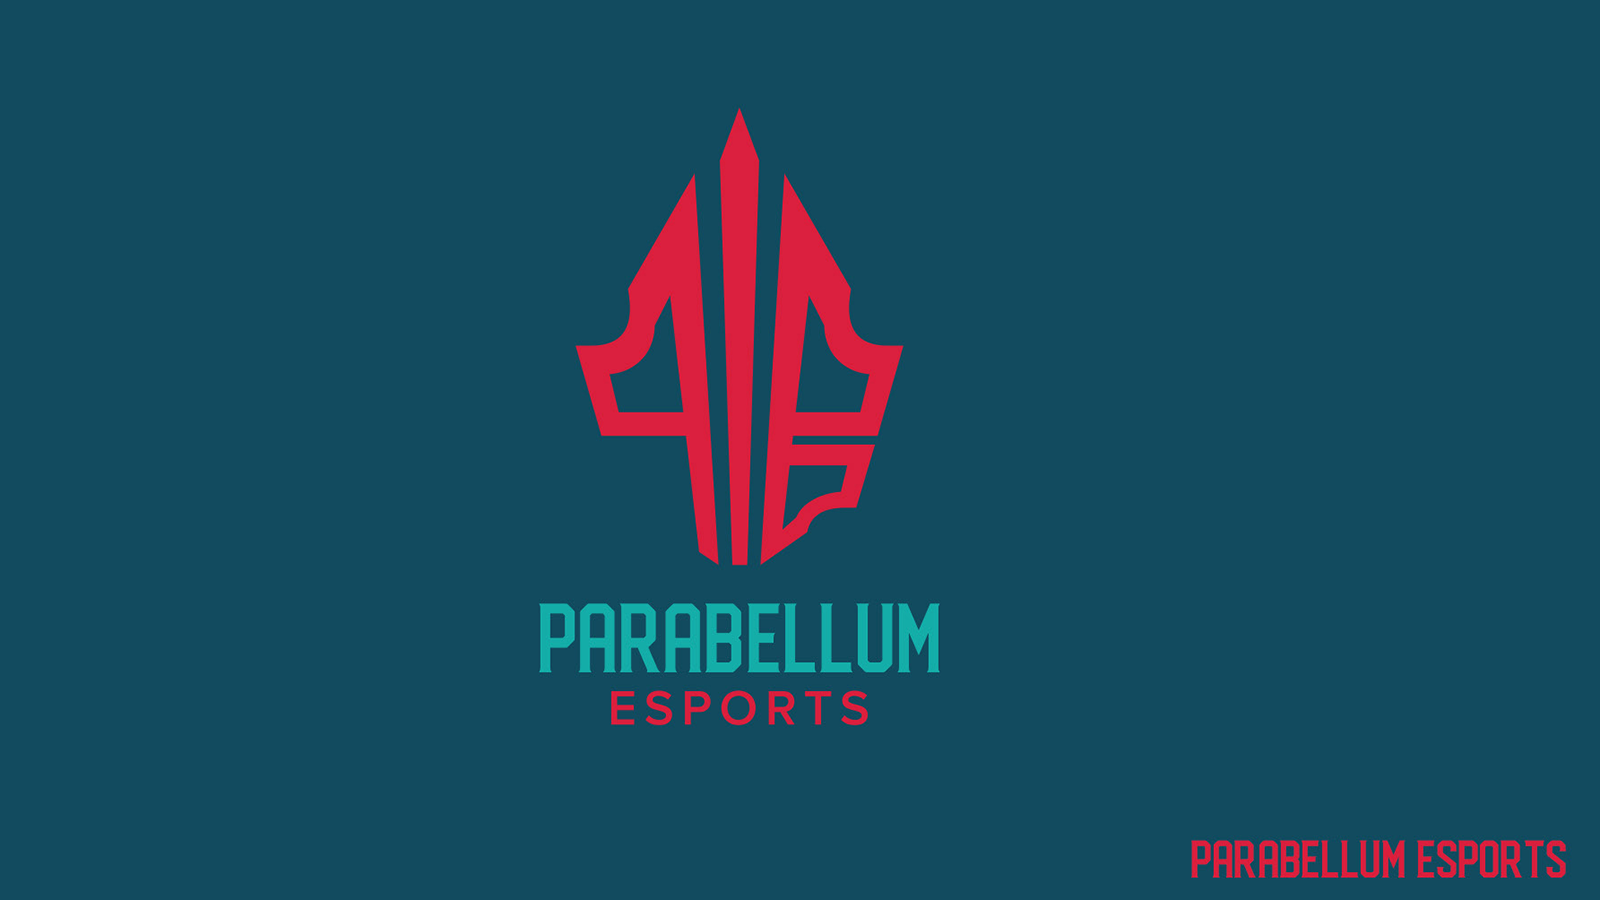 Parabellum Esports Appears to Shut Down as CEO Leaves